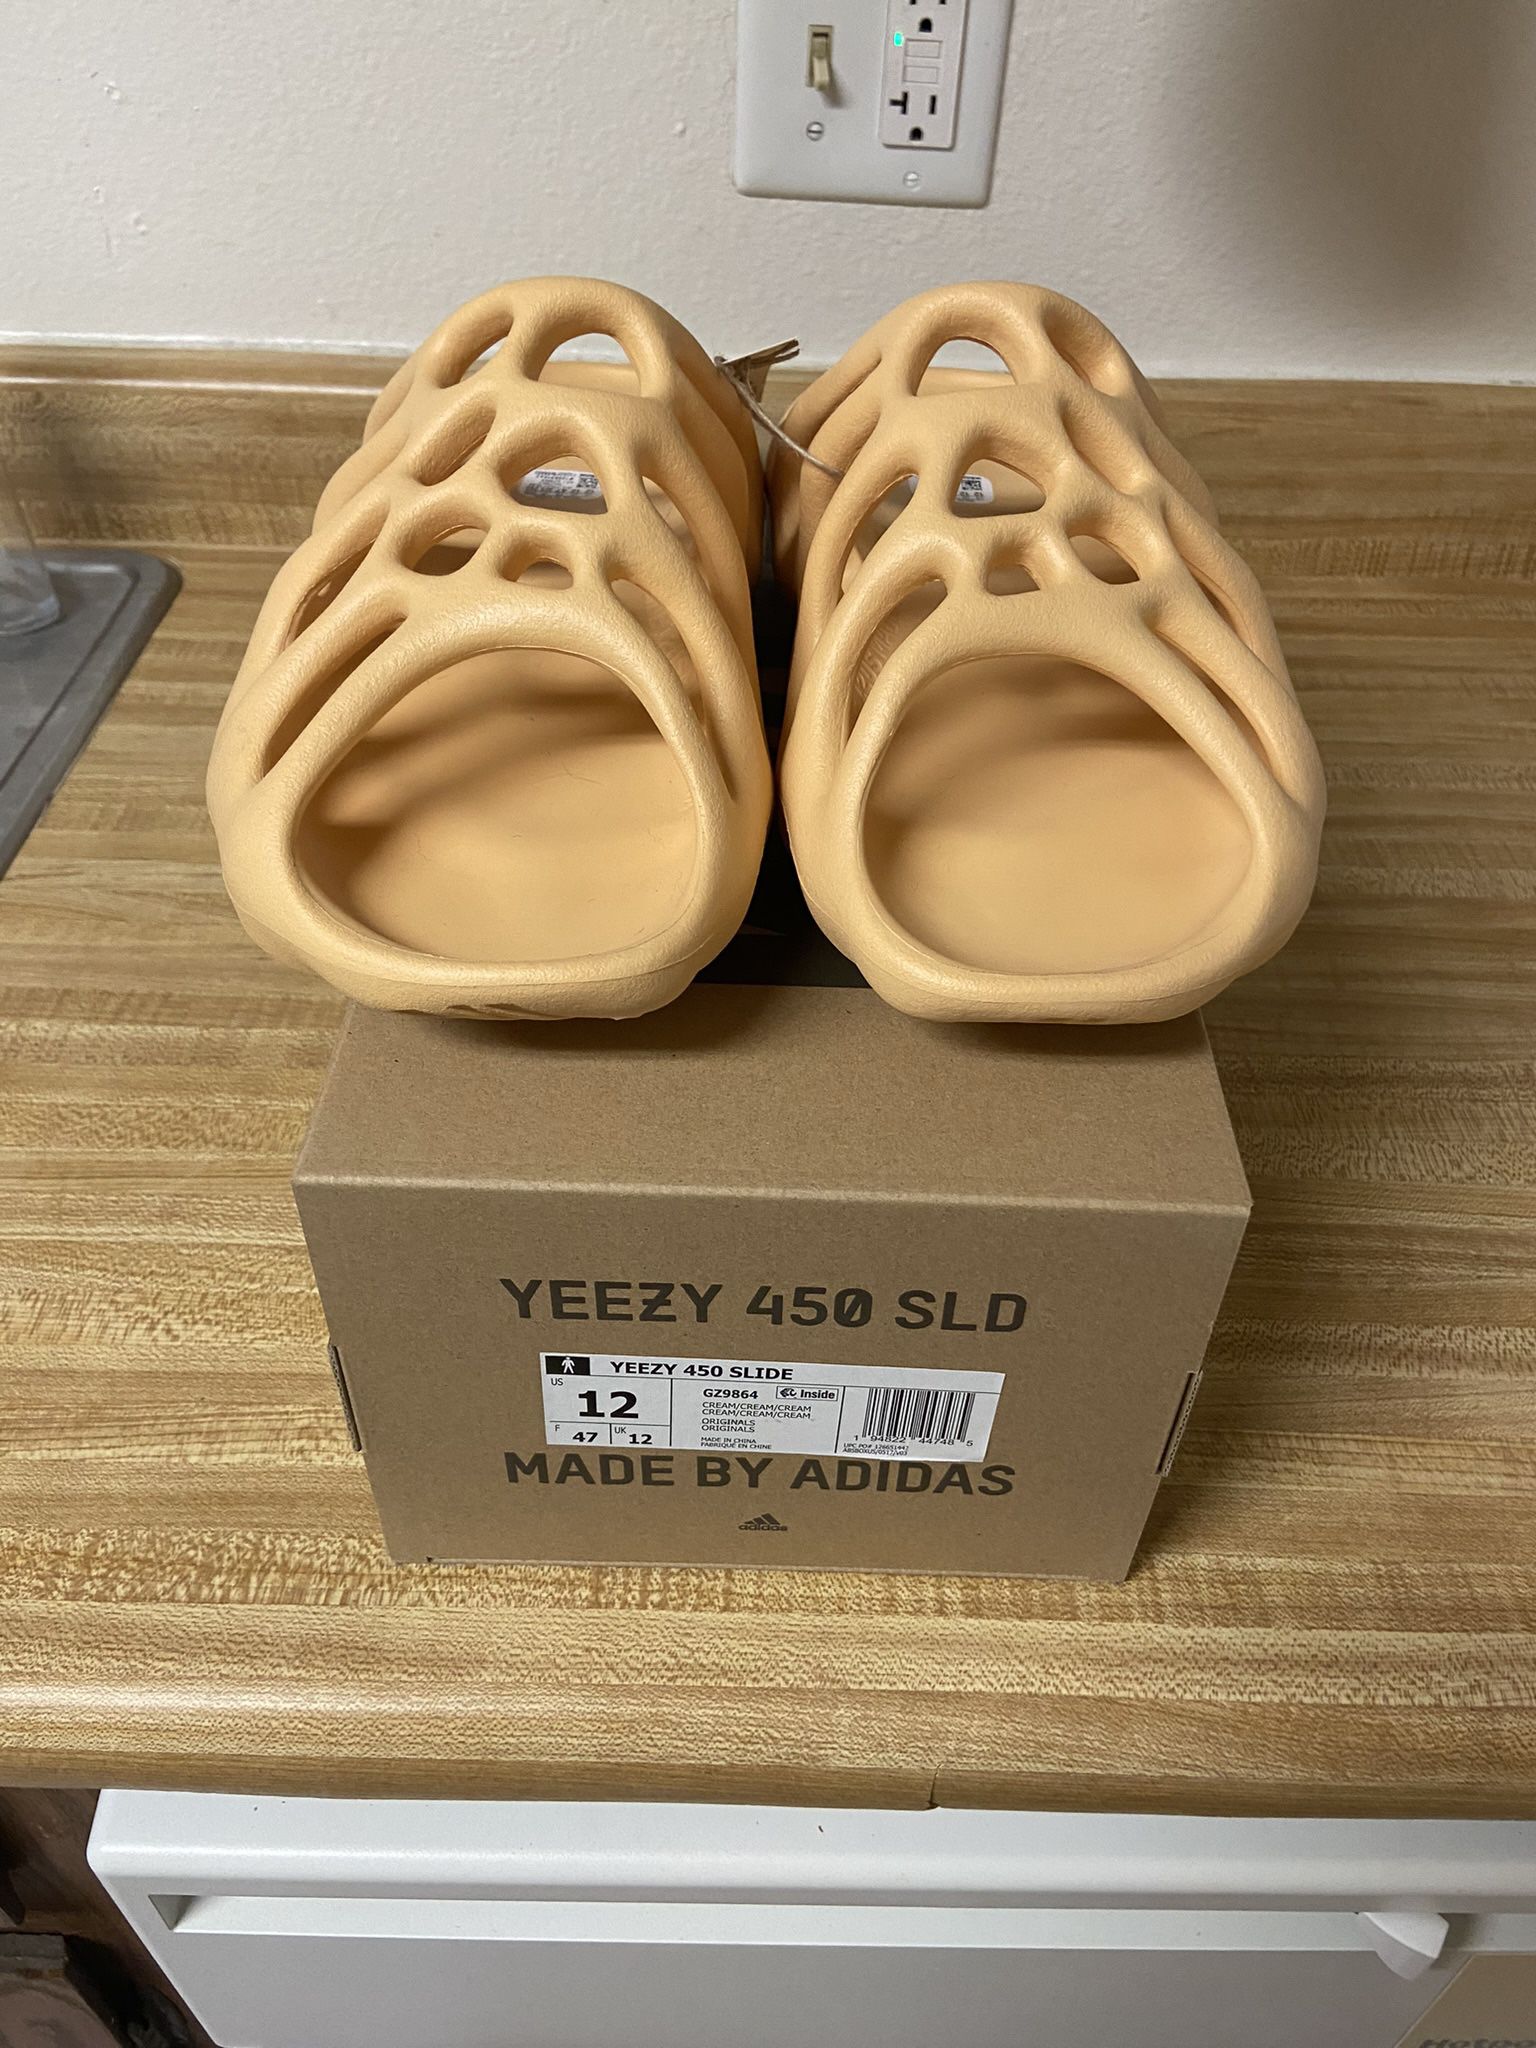 Yeezy 450 slides  Sneakers fashion, Fall shoes, Yeezy